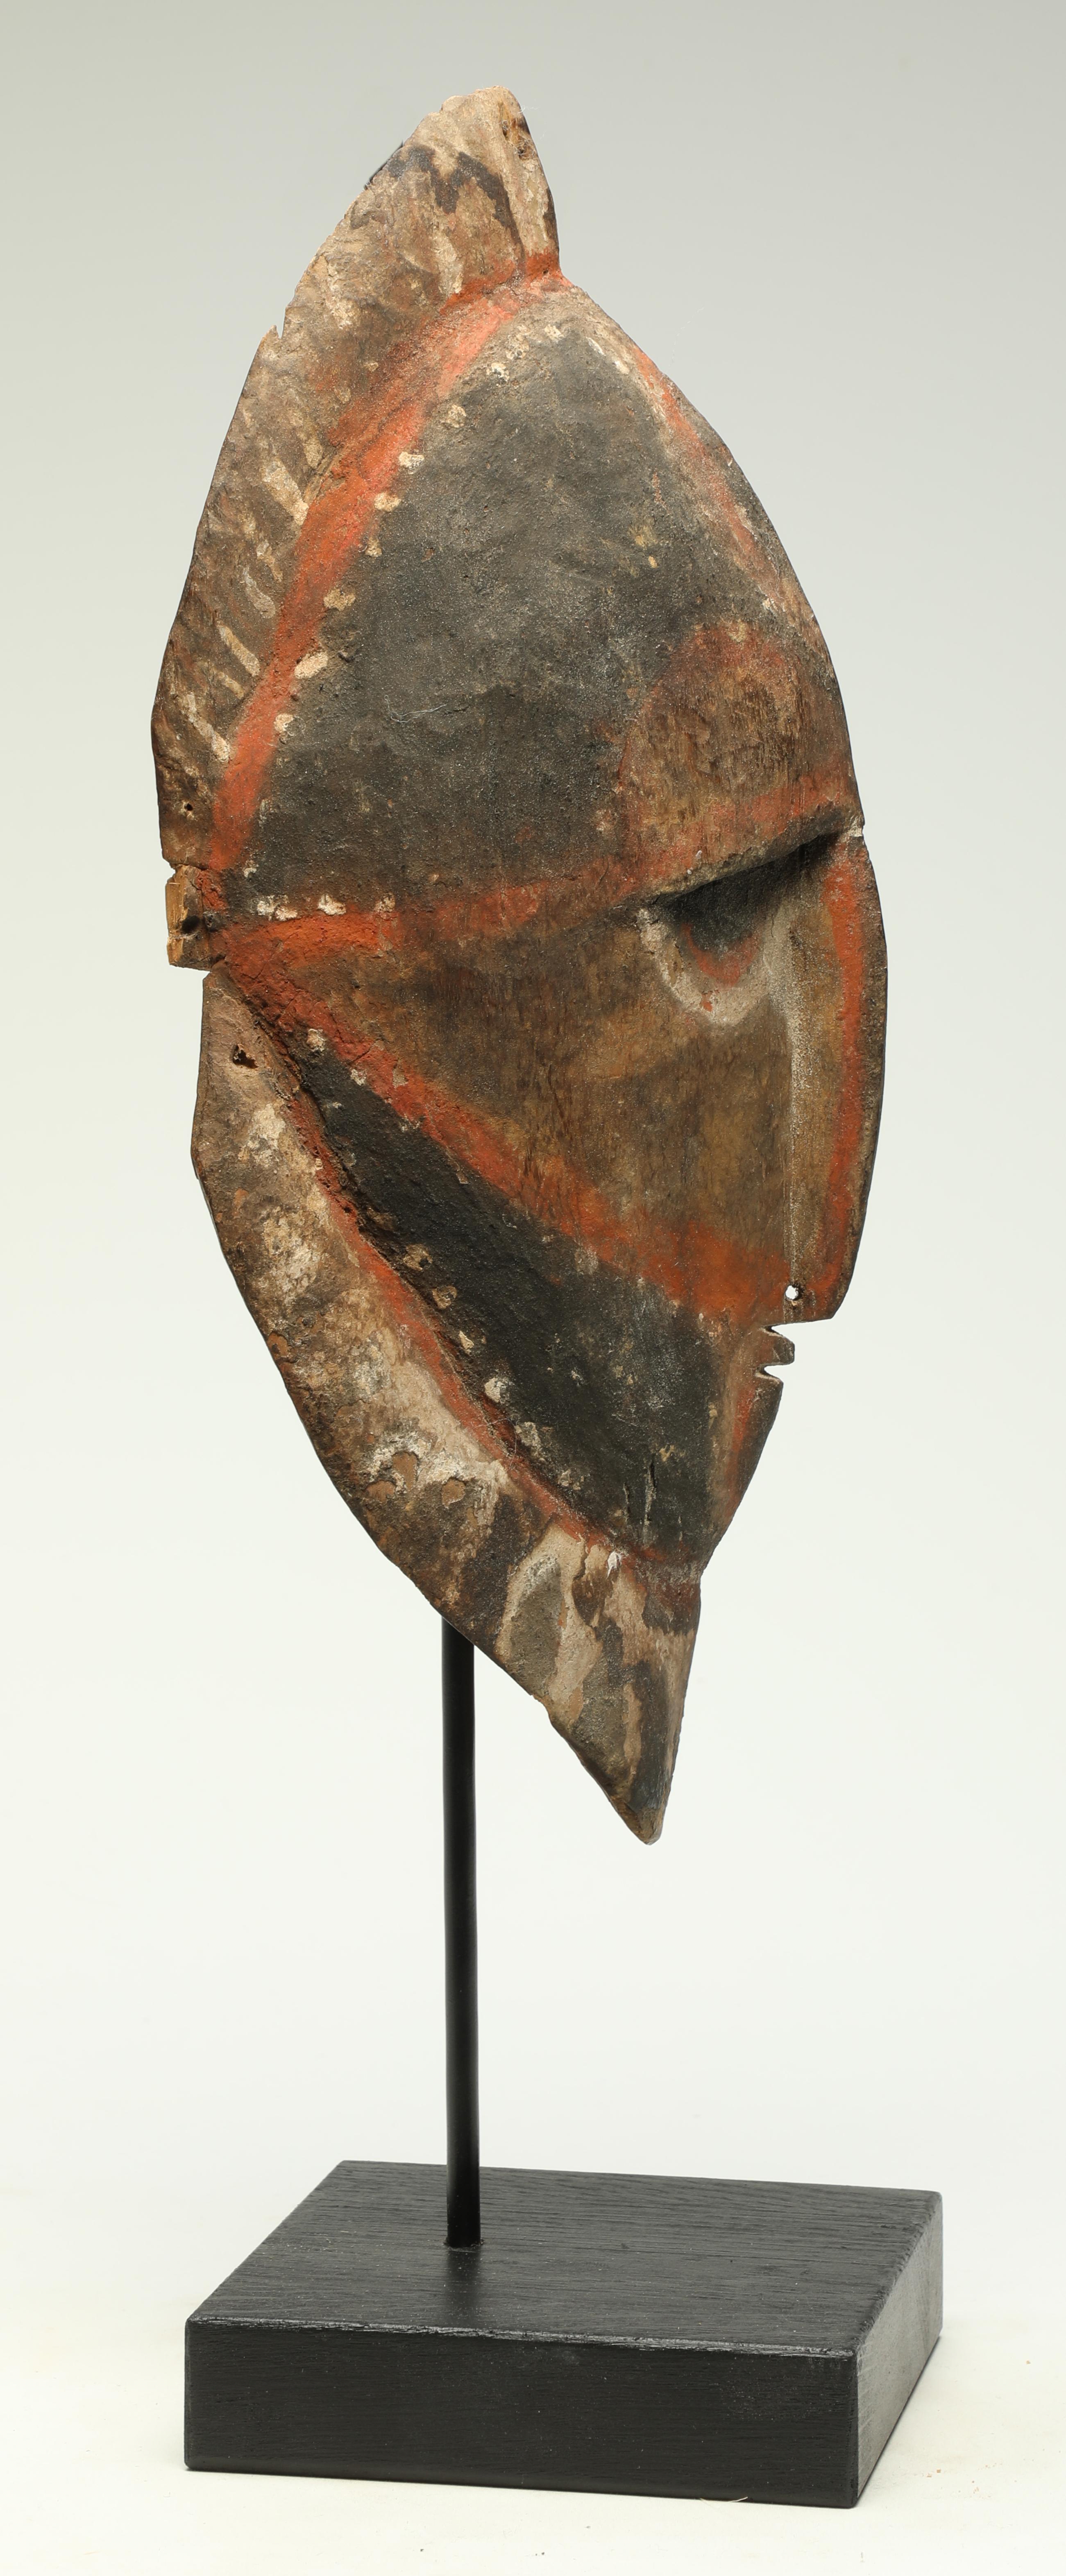 Early Papua New Guinea painted Maprik carved hard wood mask. Mid-20th century, with wonderful curved expressive asymmetrical face. Long nose with pierced septum. Faded polychrome pigments with yellow, white, black and red. 
Mask is 13 inches high,